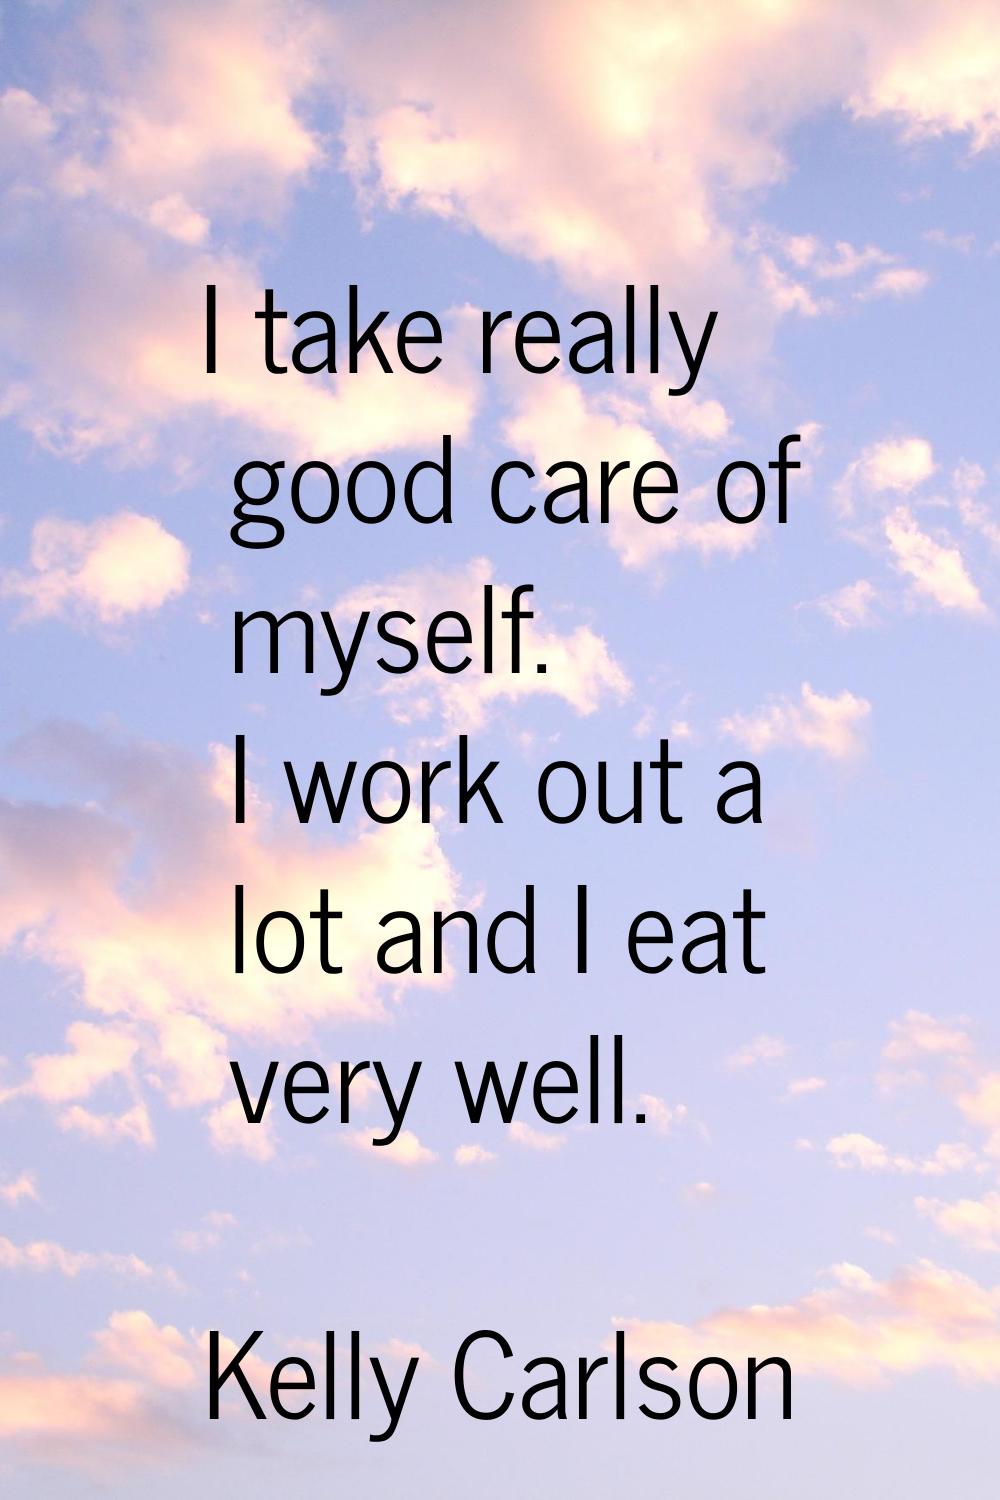 I take really good care of myself. I work out a lot and I eat very well.